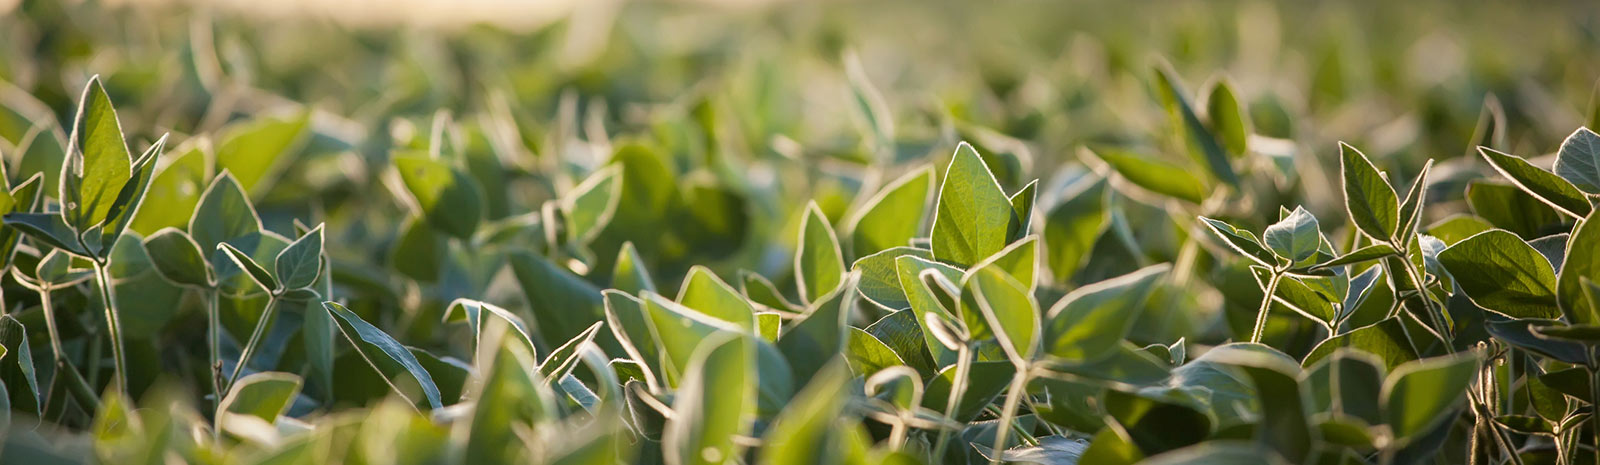 Close up of green crop leaves